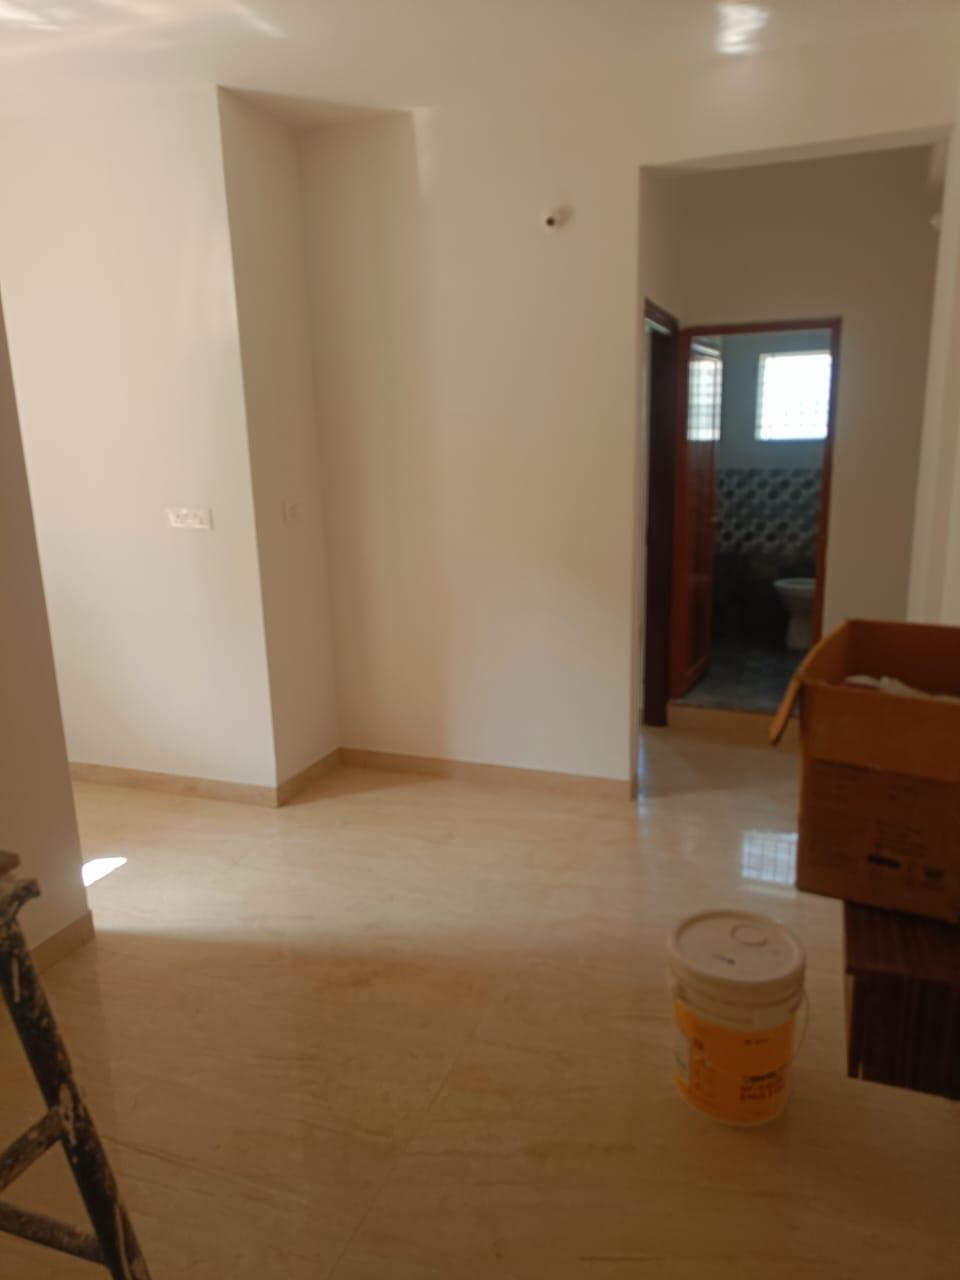 1 BHK Residential Apartment for Lease Only at 13 Lakhs - JAML2 - 30 in Kammasandra village